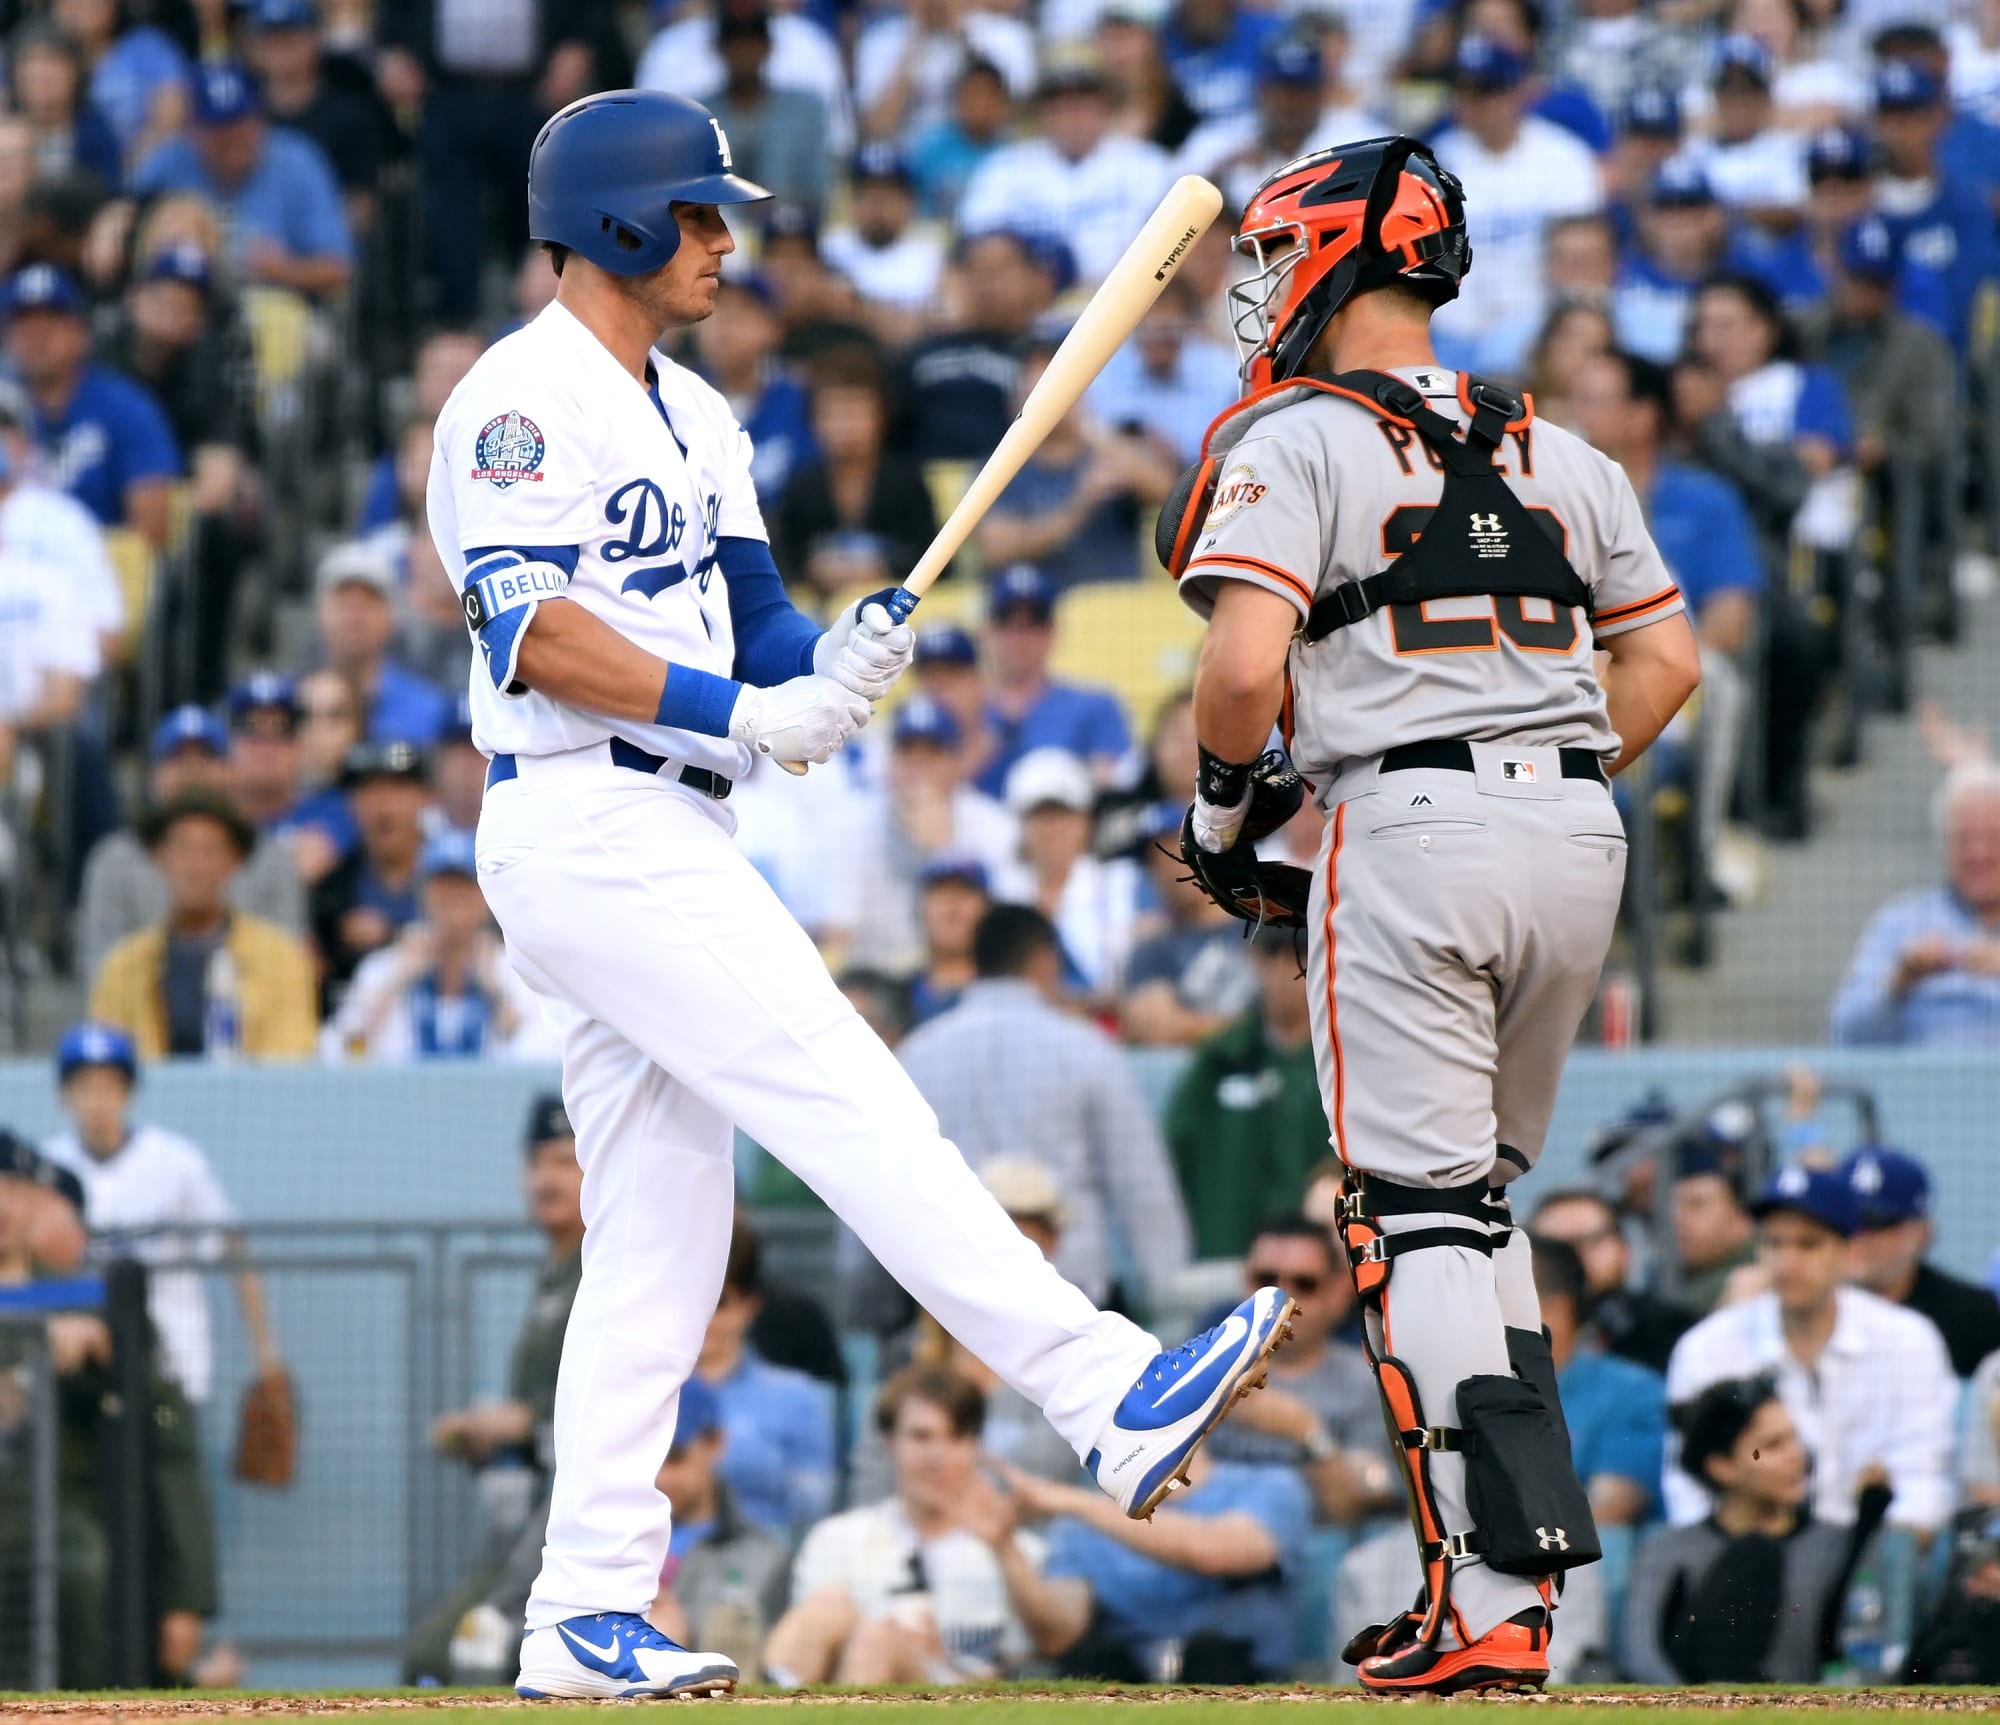 Dodgers Preview LA Looks to Bounce Back in Game 3 vs. Giants